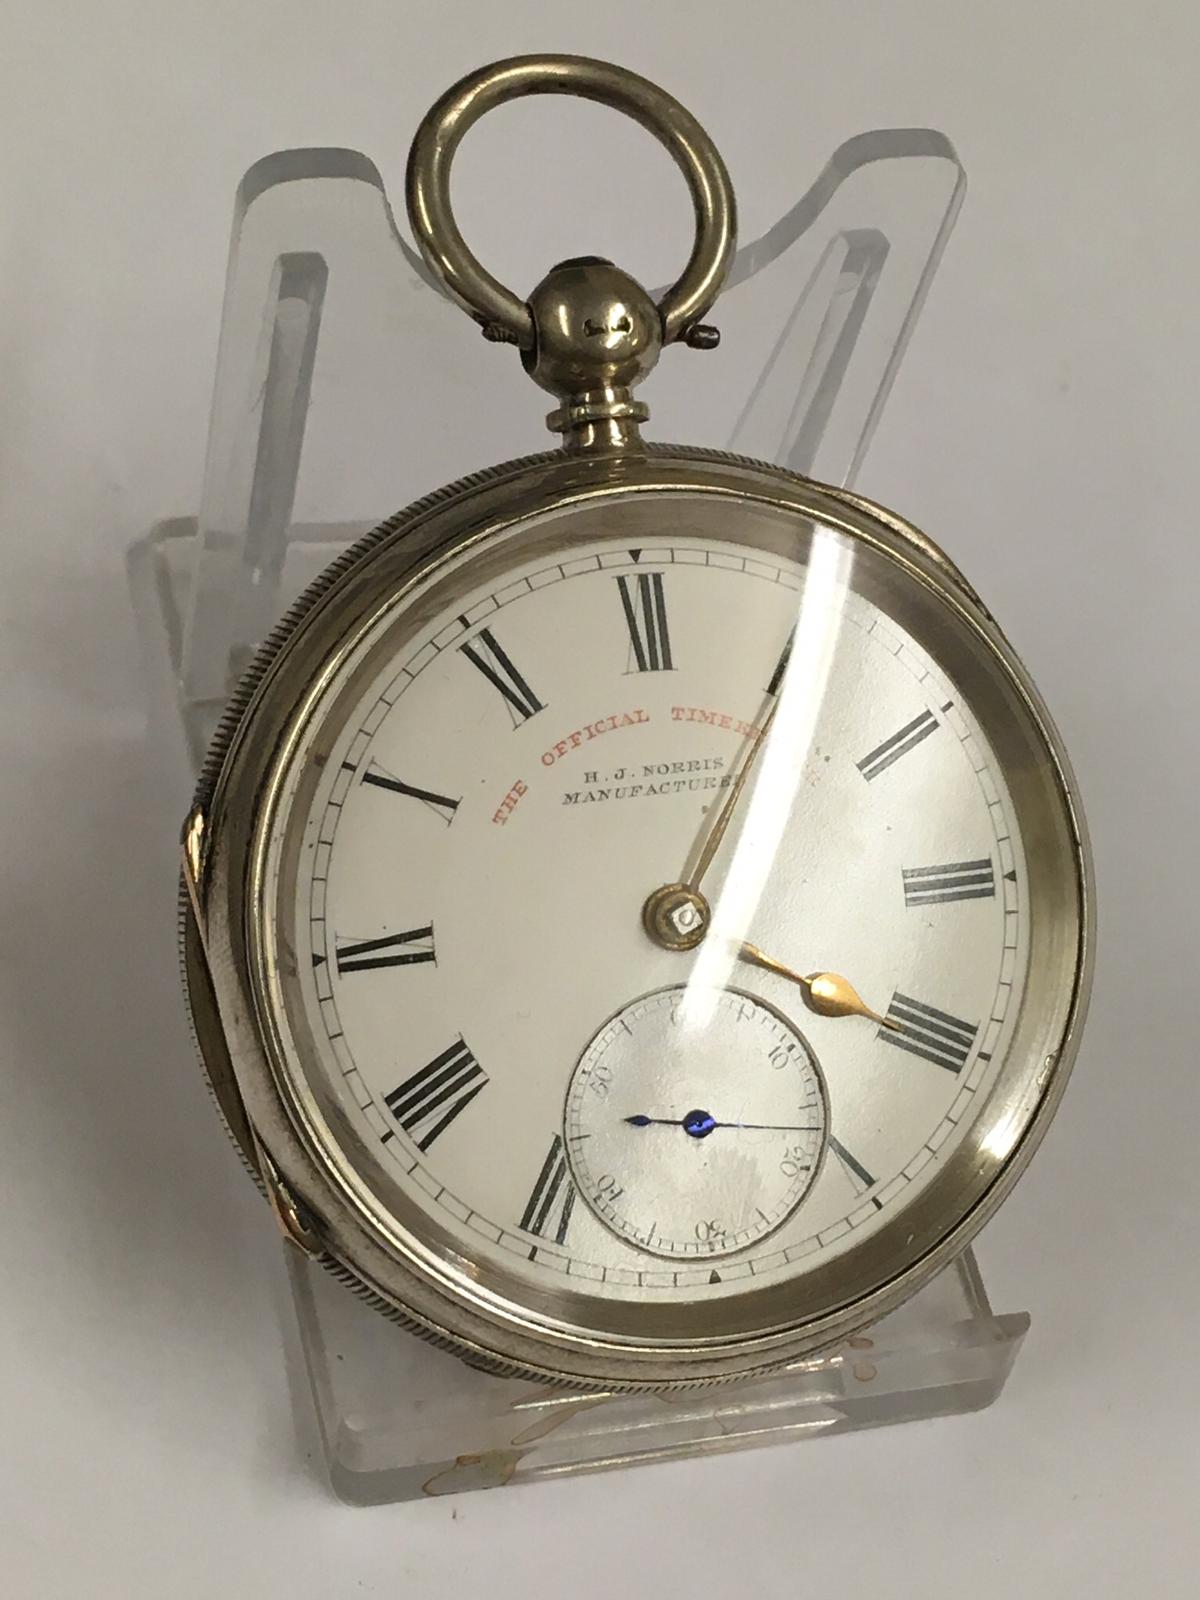 Antique silver lever pocket watch ( Coventry ). Ticks if shaken but no key . Sold with no guarantees - Image 5 of 11